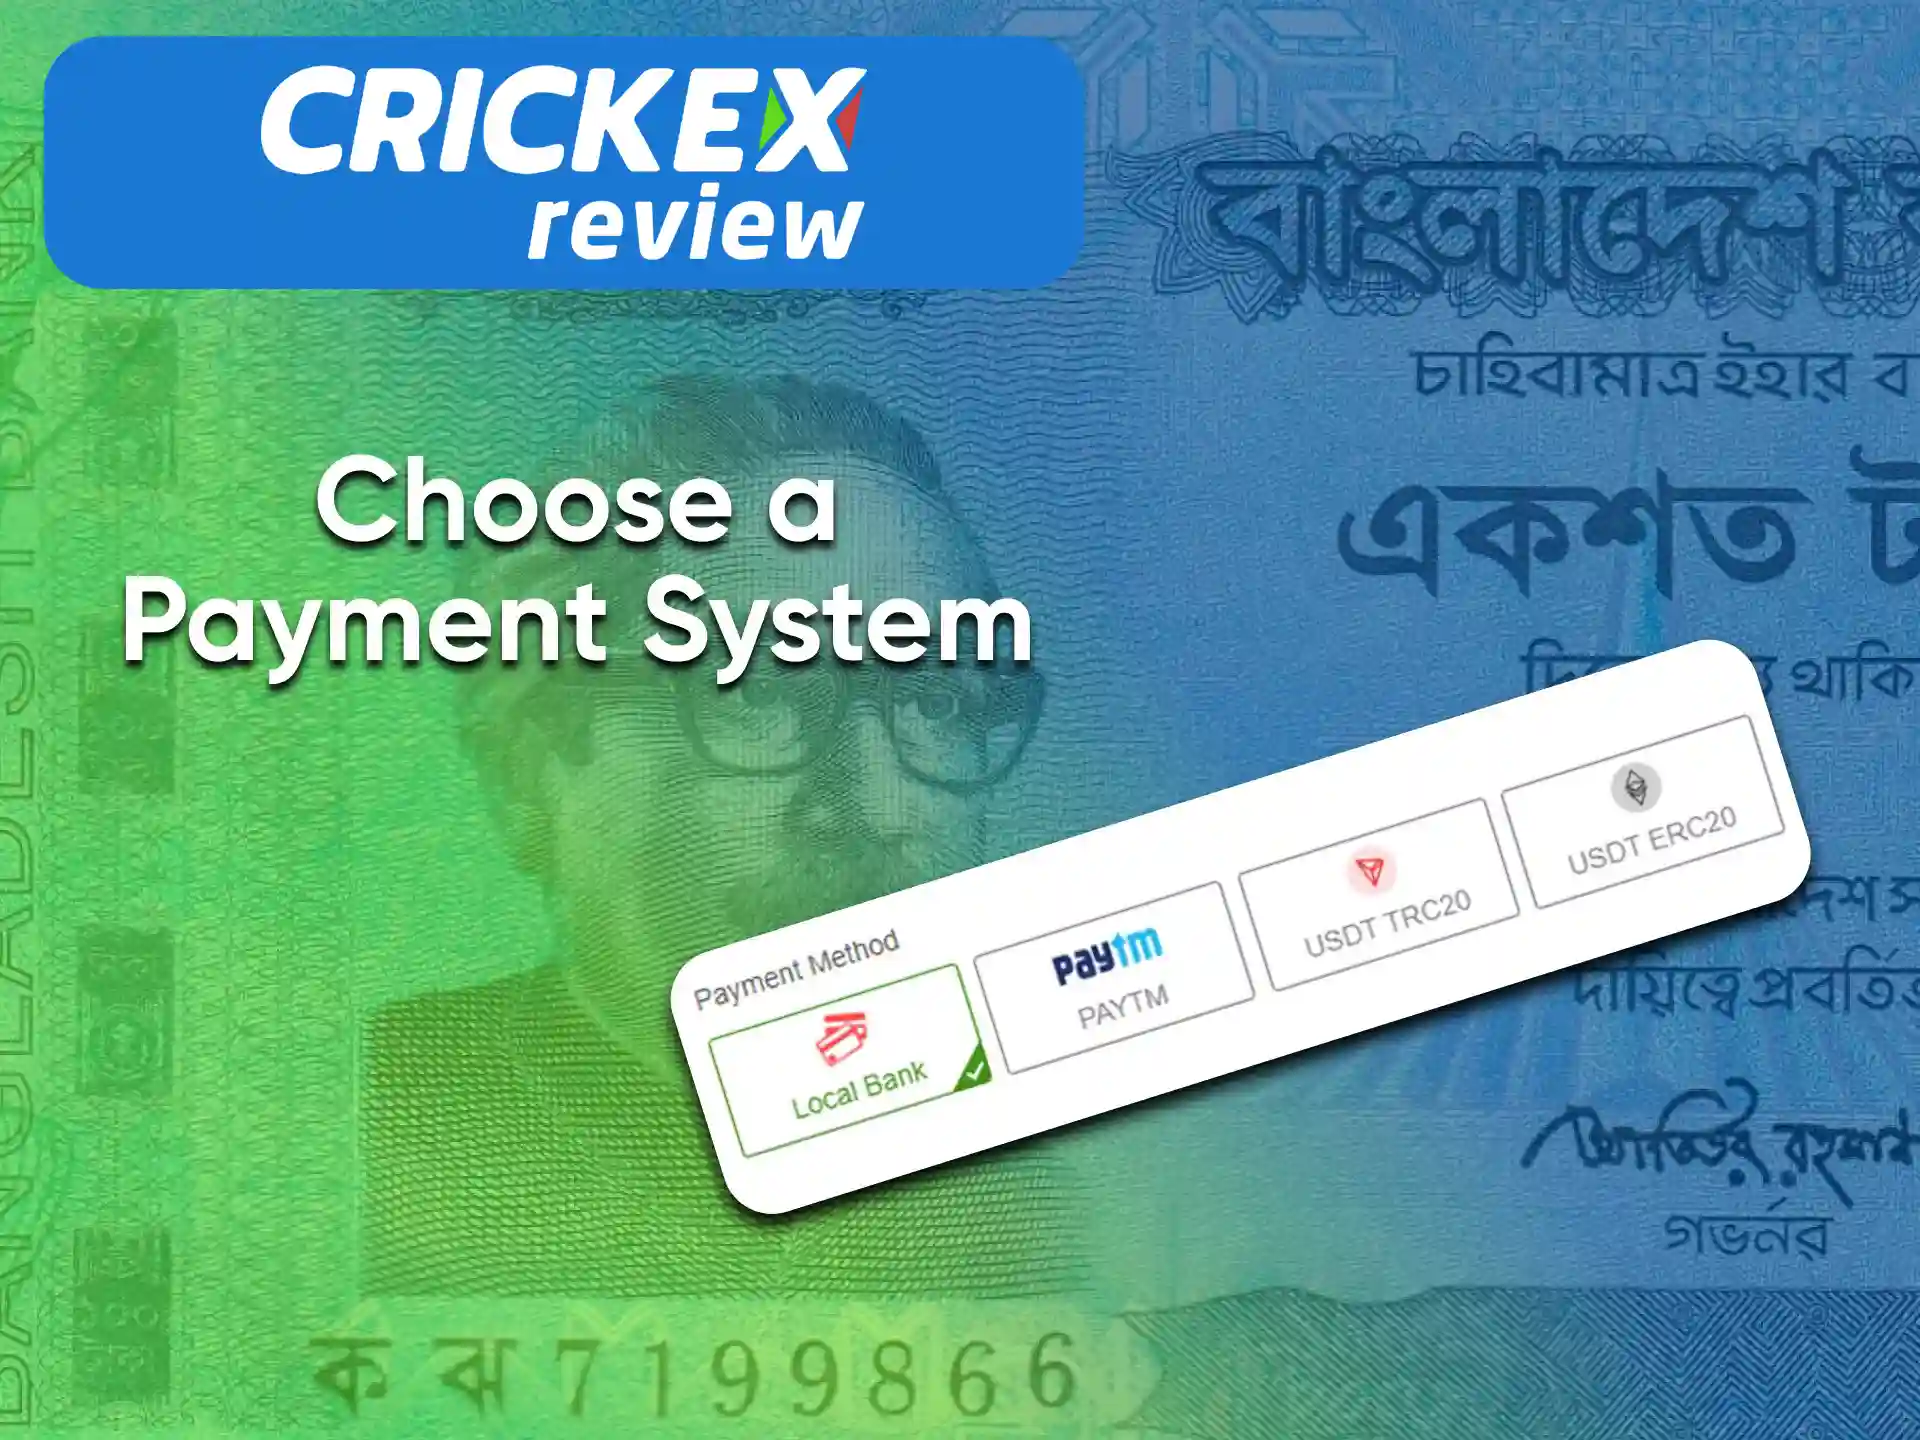 To replenish your Crickex account, choose a convenient payment system.